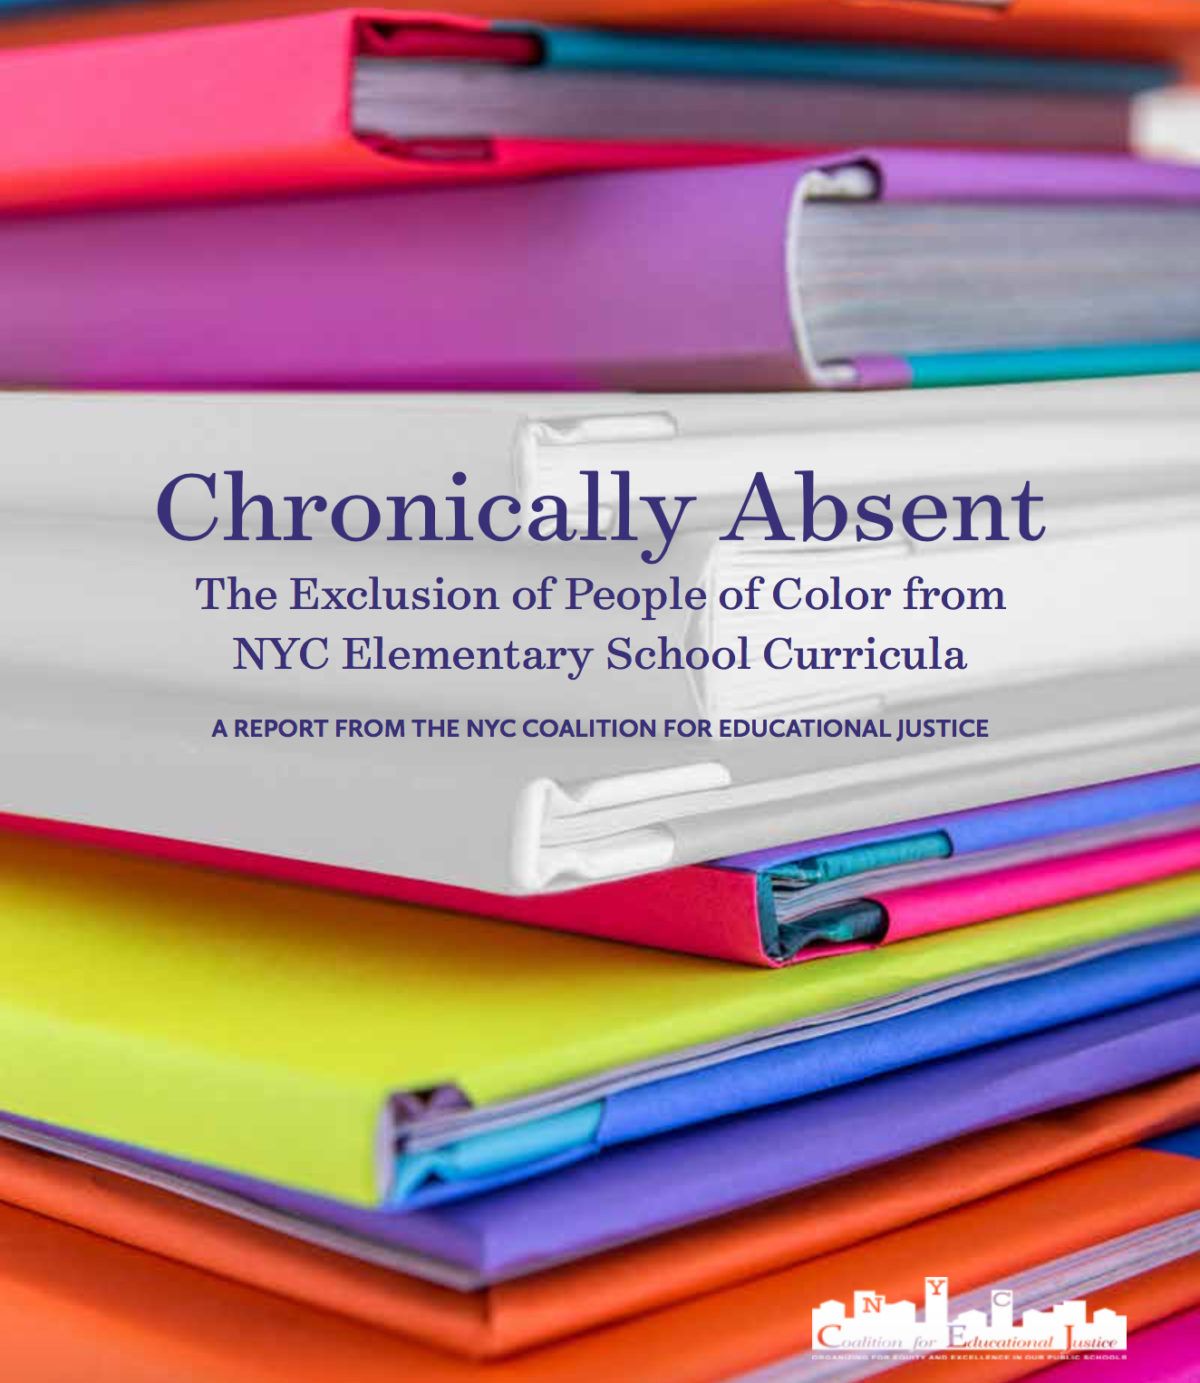 Cover image of the report Chronically Absent: The Exclusion of People of Color from NYC Elementary School Curricula by the NYC Coalition for Educational Justice.